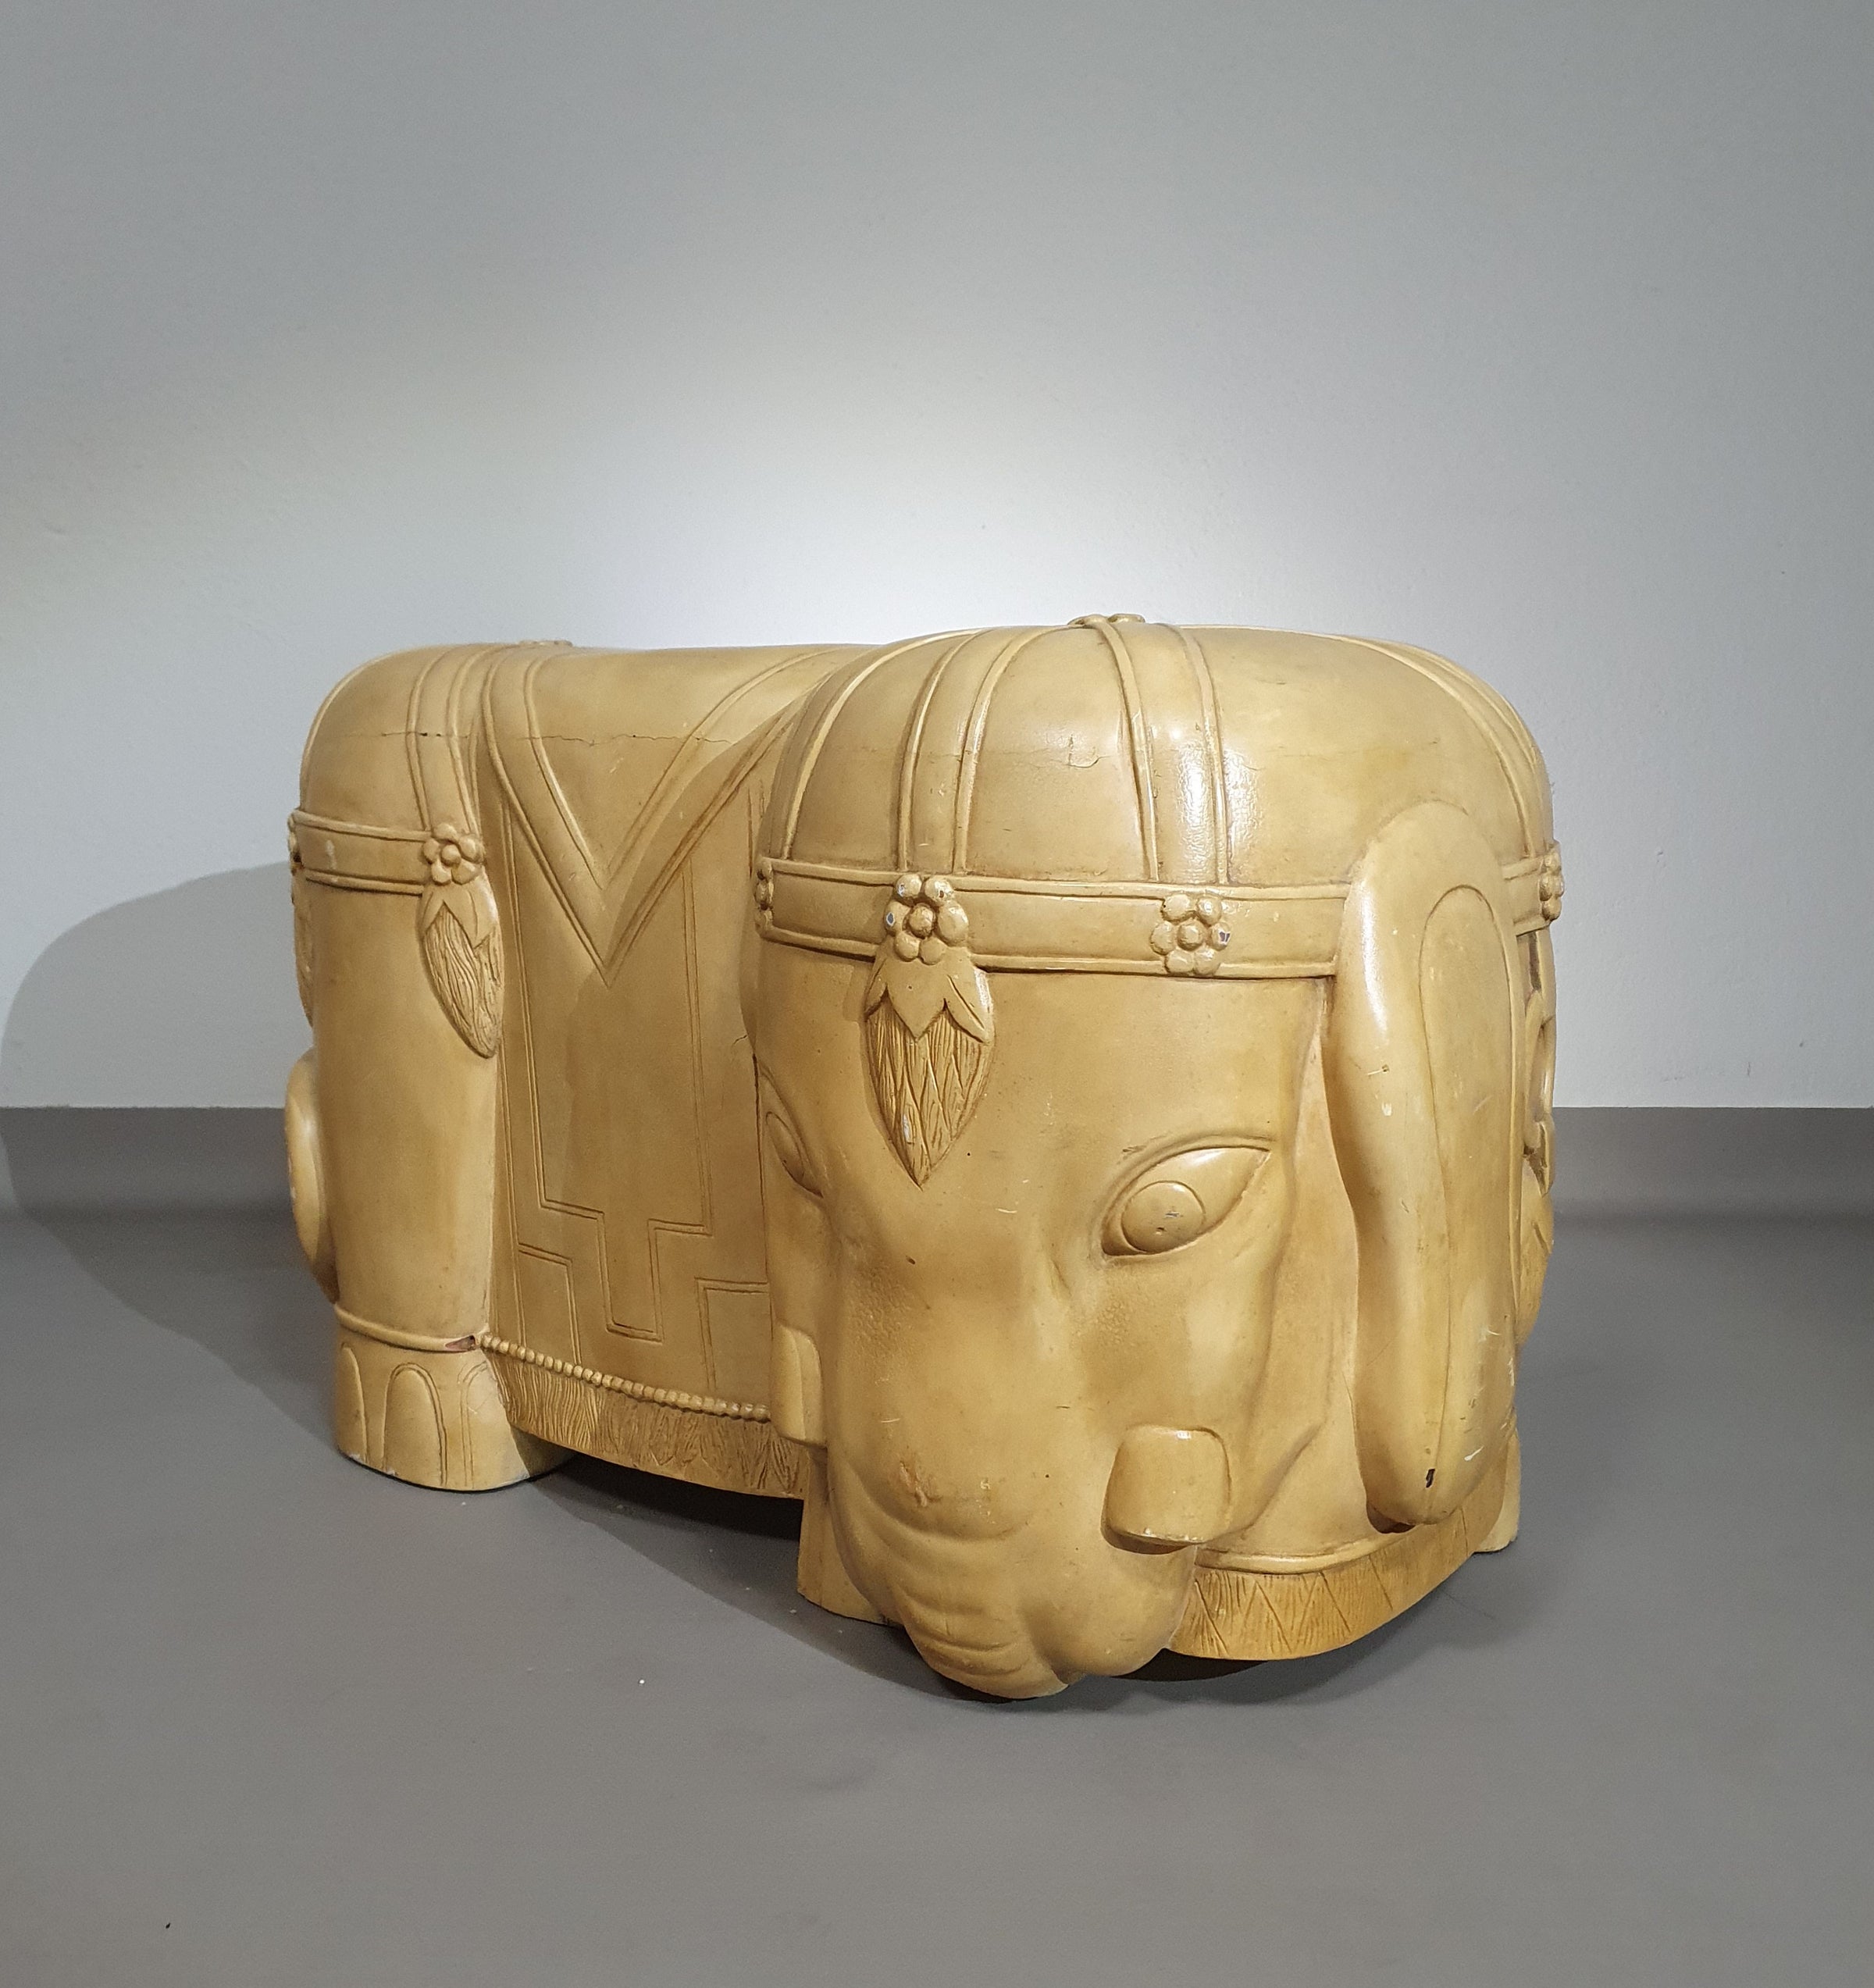 Decorative wood and resin elephant table / stool